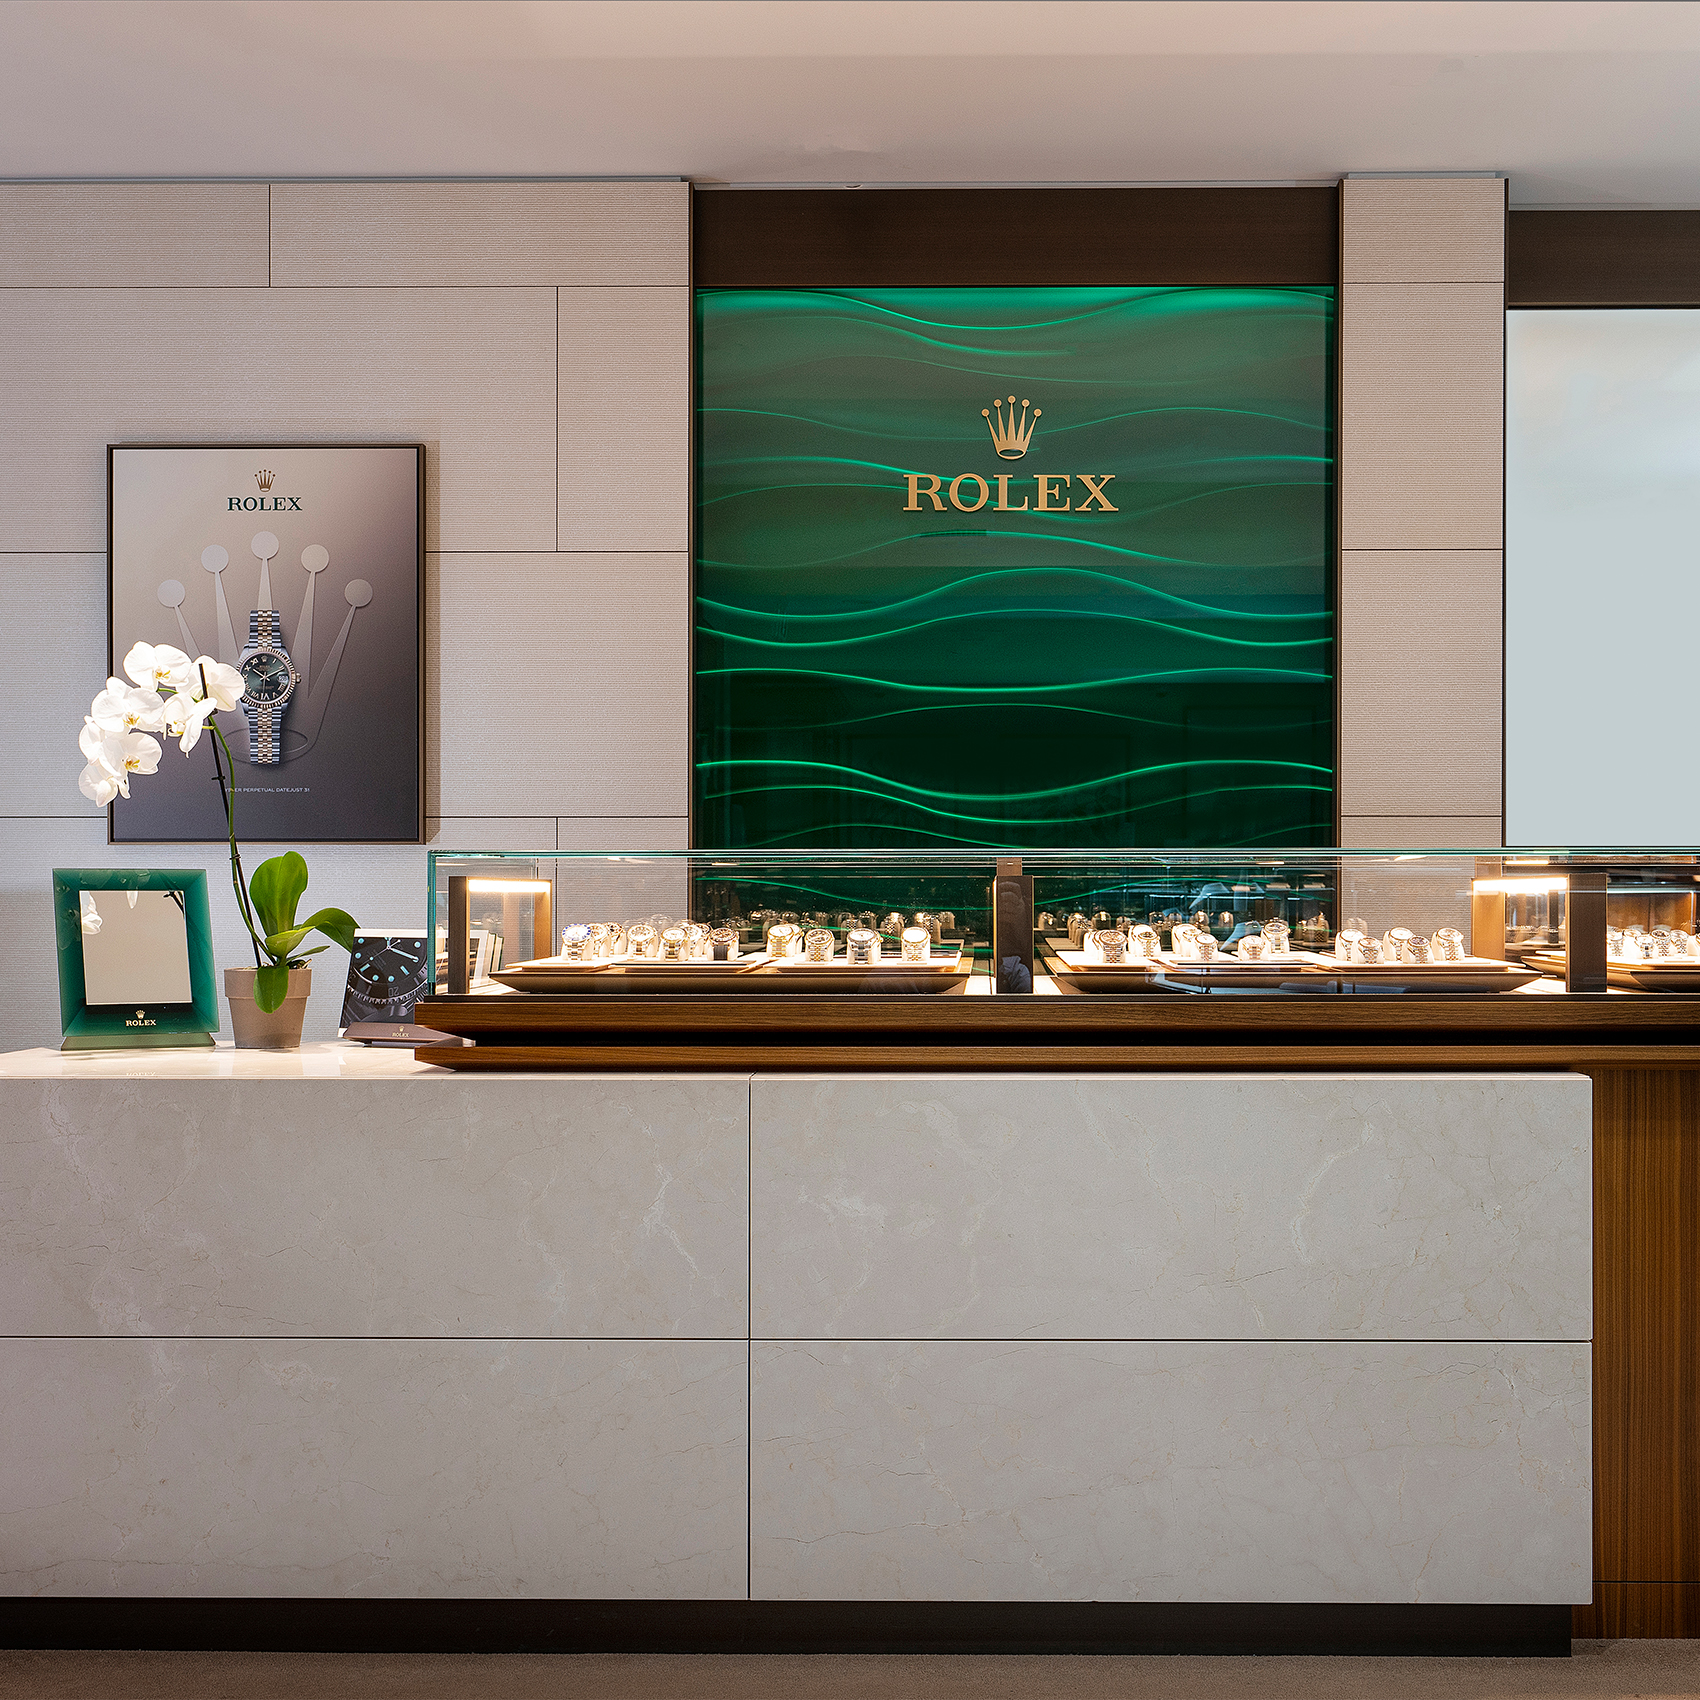 La Mine dOr Jewellers, an Official Rolex Retailer, located at Moncton, NB, Canada